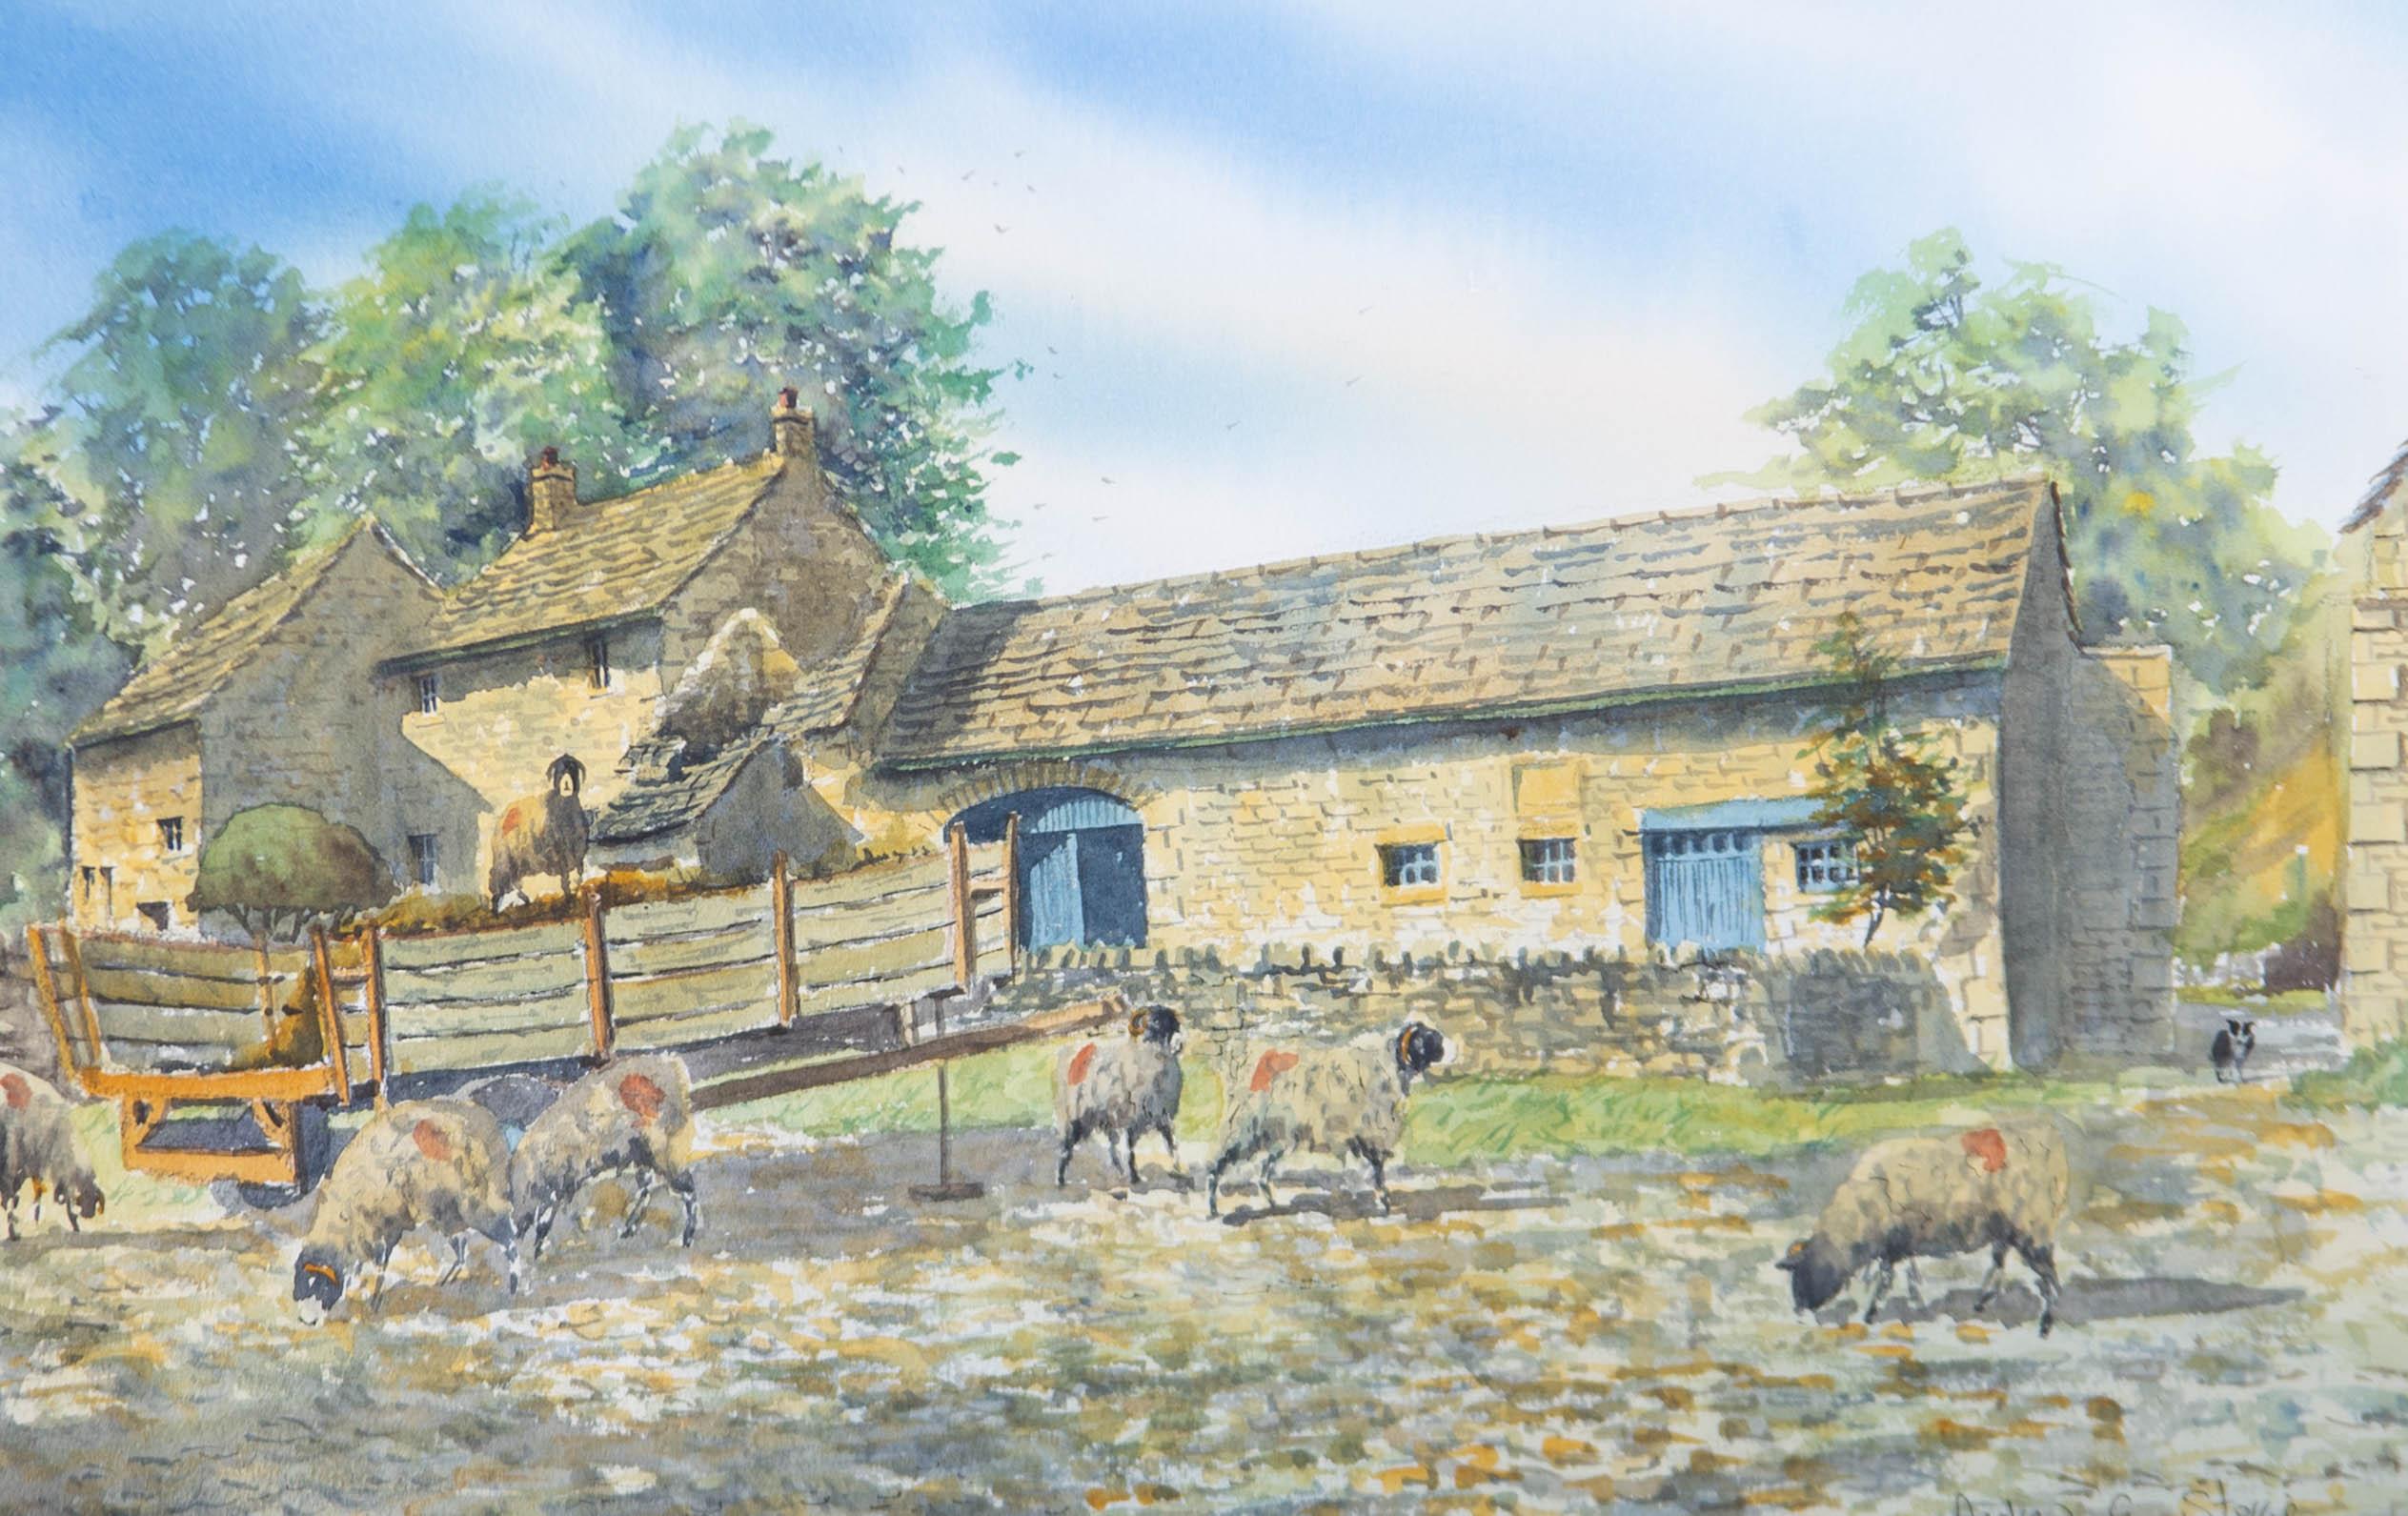 A farmyard scene depicting a flock of sheep in front of farm buildings. A sheepdog looks on from the right-hand side of the composition. Presented glazed in a cream mount with gilt-effect detailing and a thin wooden frame with gilt-effect inner.